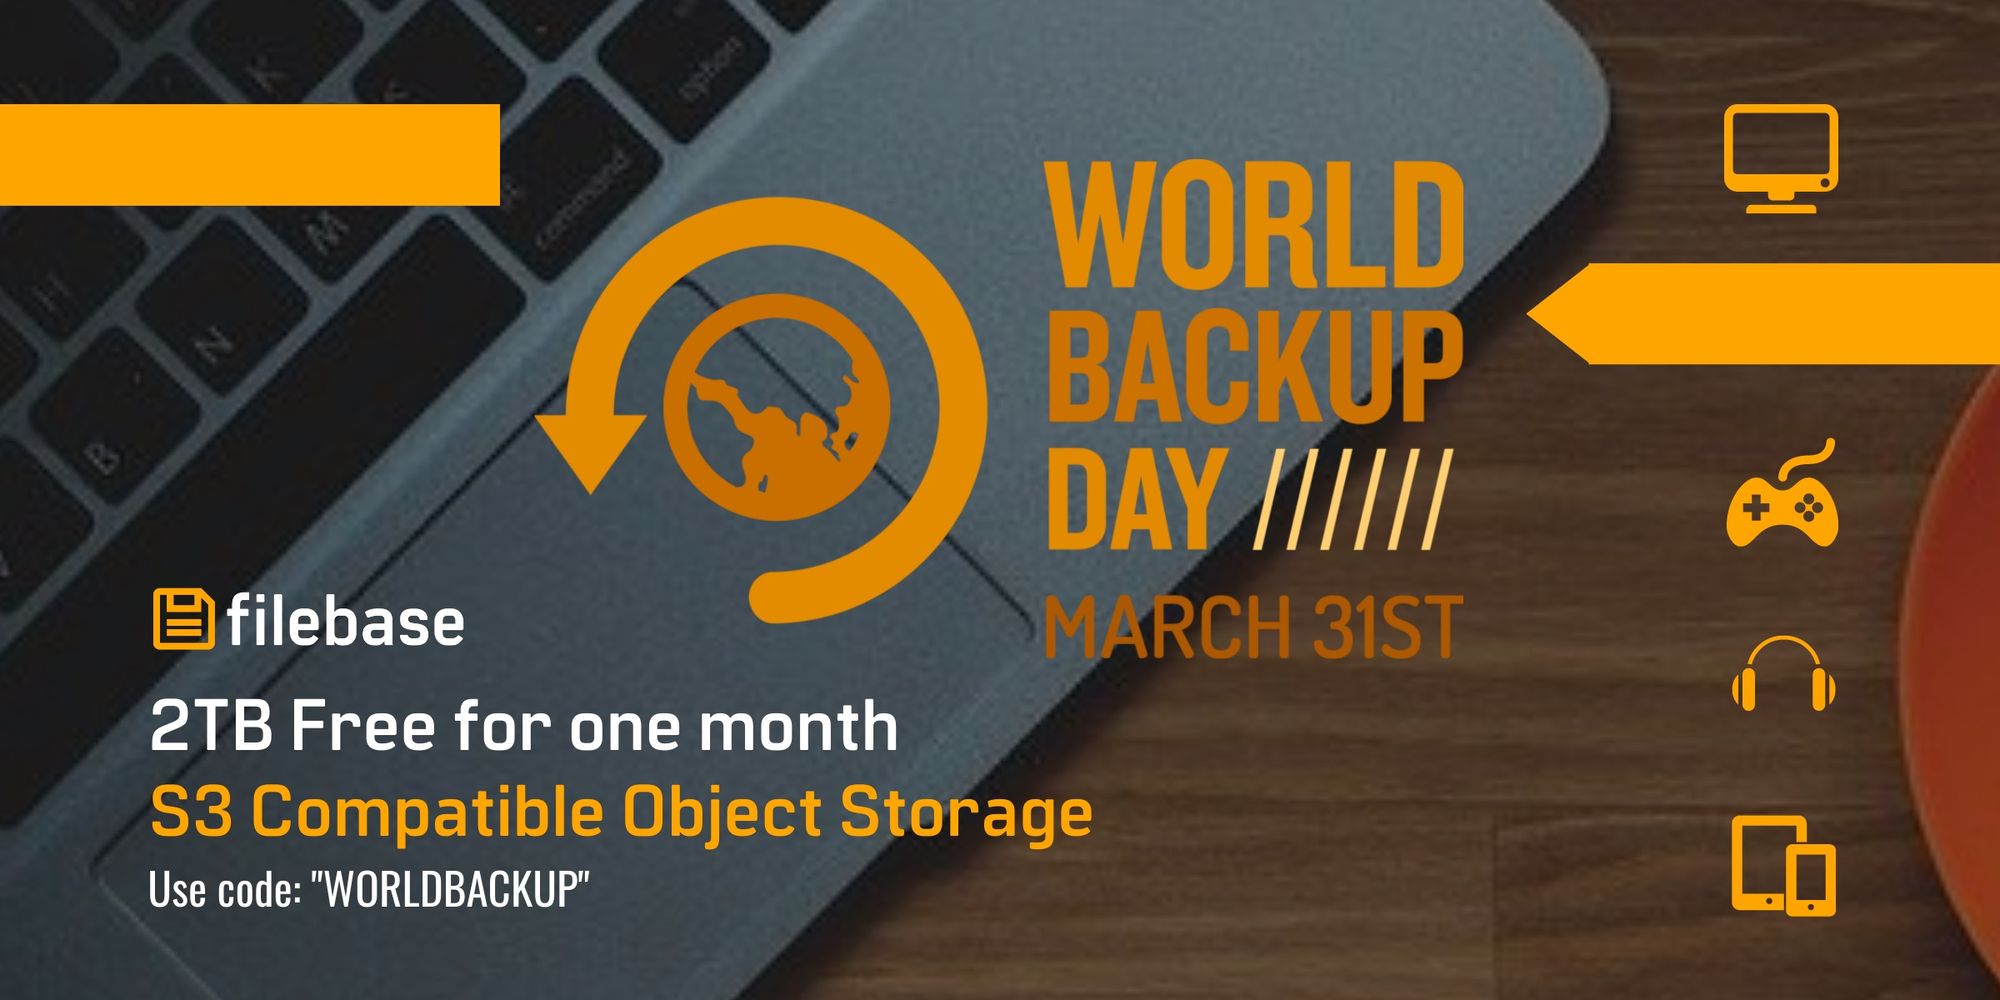 Celebrate World Backup Day 2021 with 2TB free from Filebase